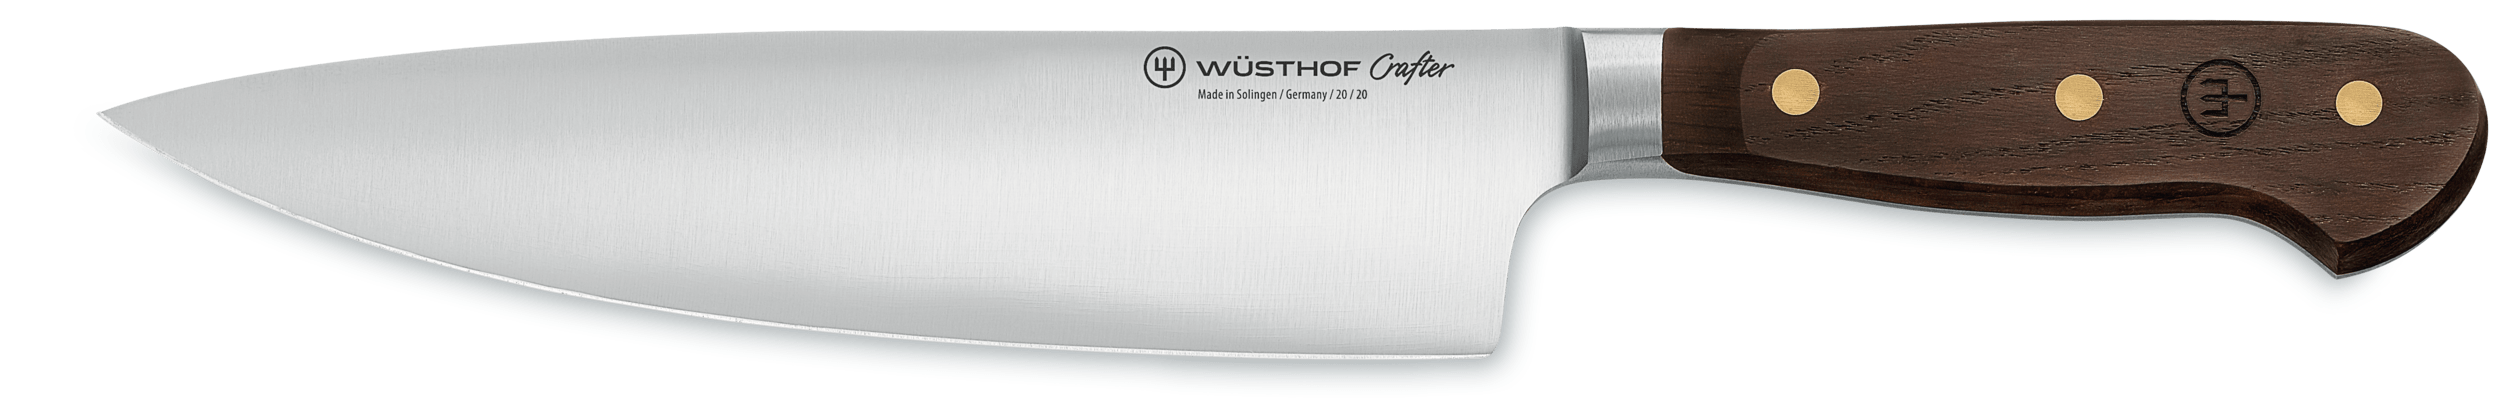 Wusthof Crafter Chef's knife 20cm 1010830120